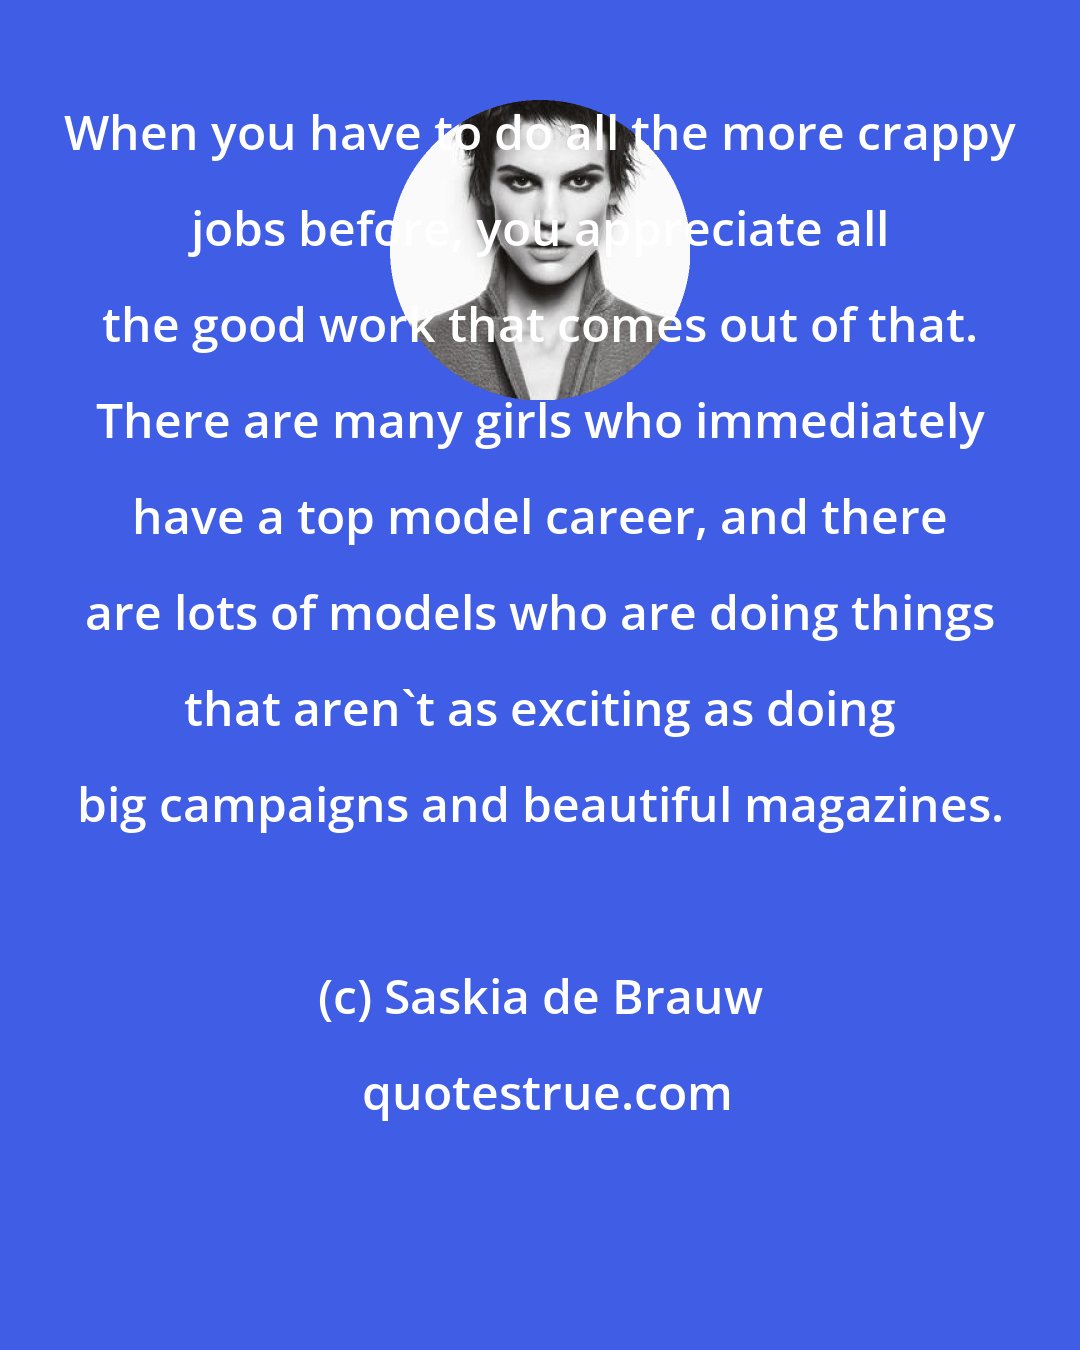 Saskia de Brauw: When you have to do all the more crappy jobs before, you appreciate all the good work that comes out of that. There are many girls who immediately have a top model career, and there are lots of models who are doing things that aren't as exciting as doing big campaigns and beautiful magazines.